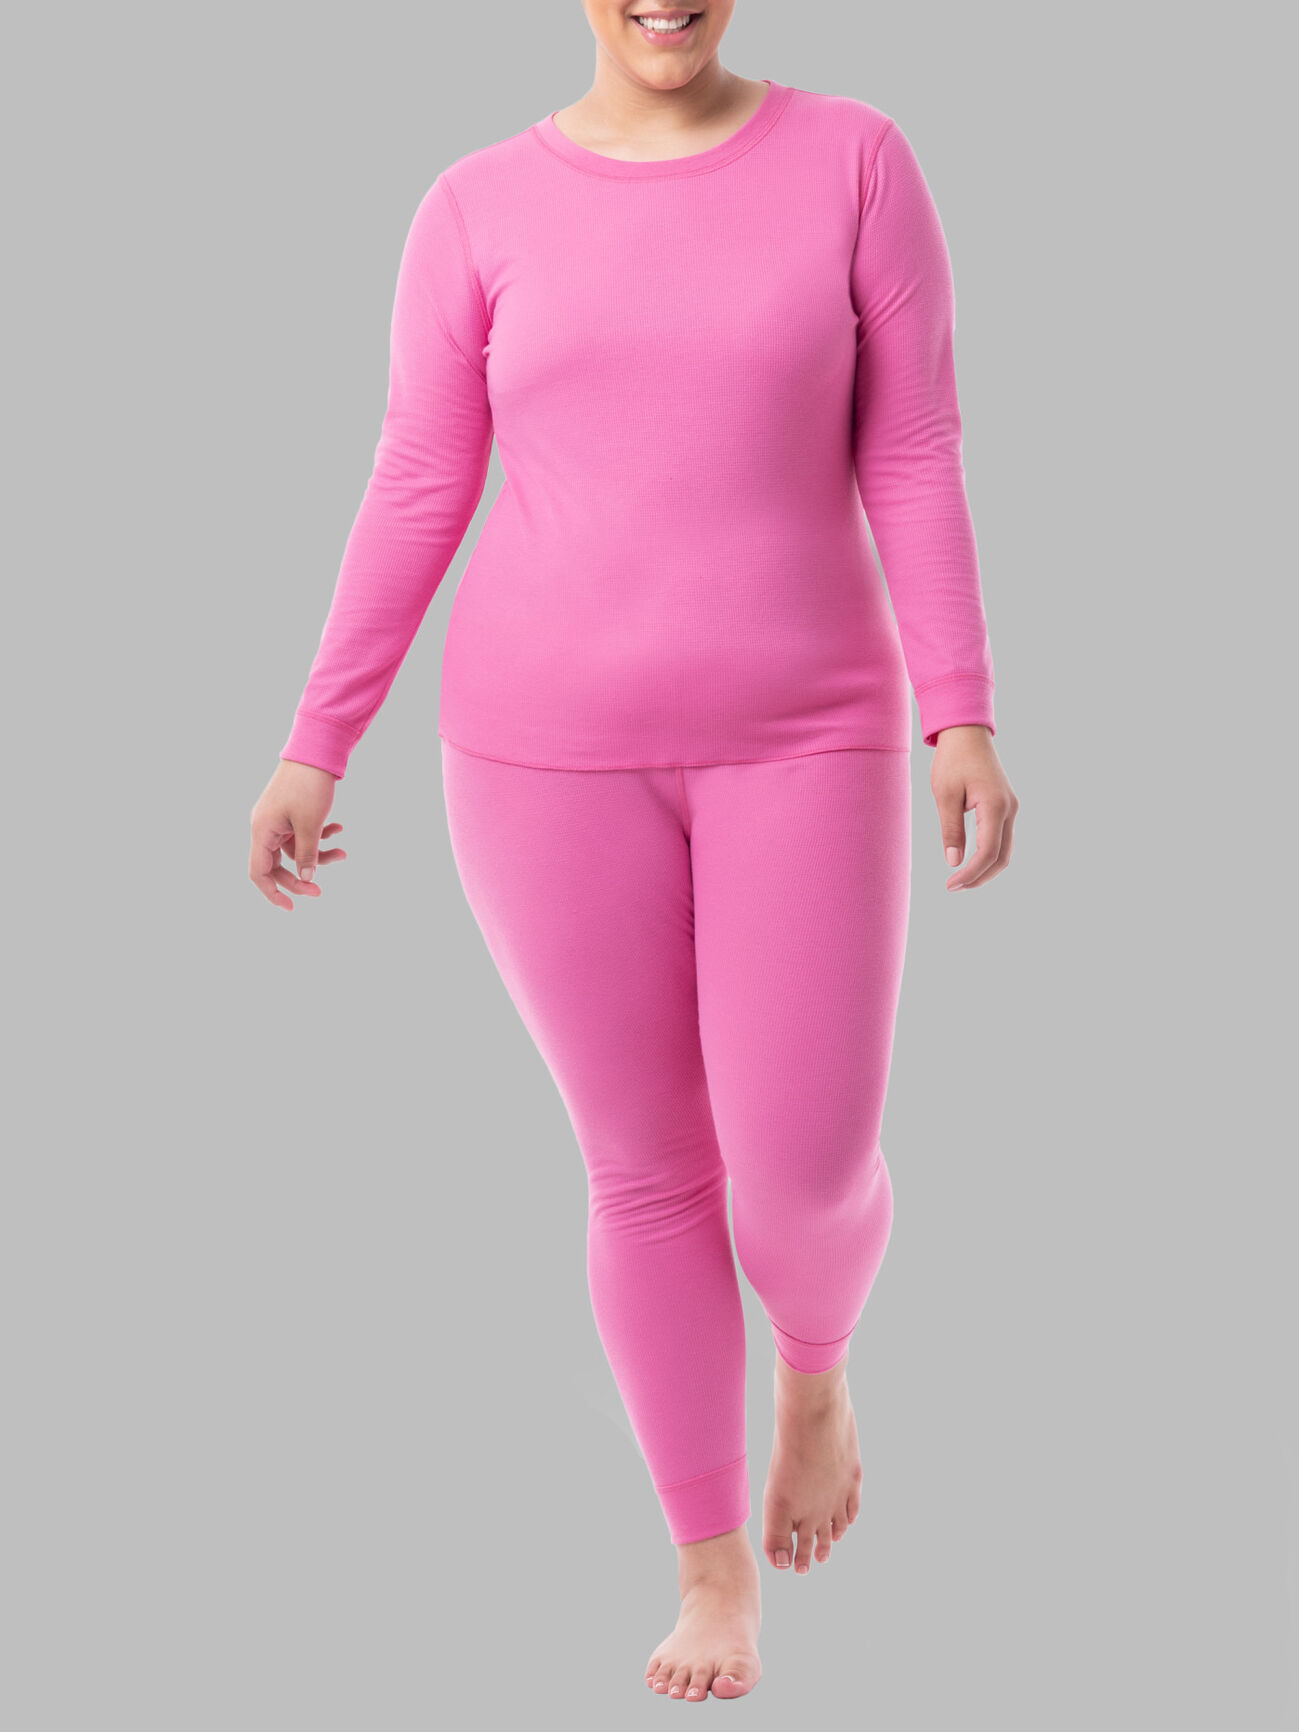 New Long Johns for Women Fit Size M-XXL Winter Thermal Underwear